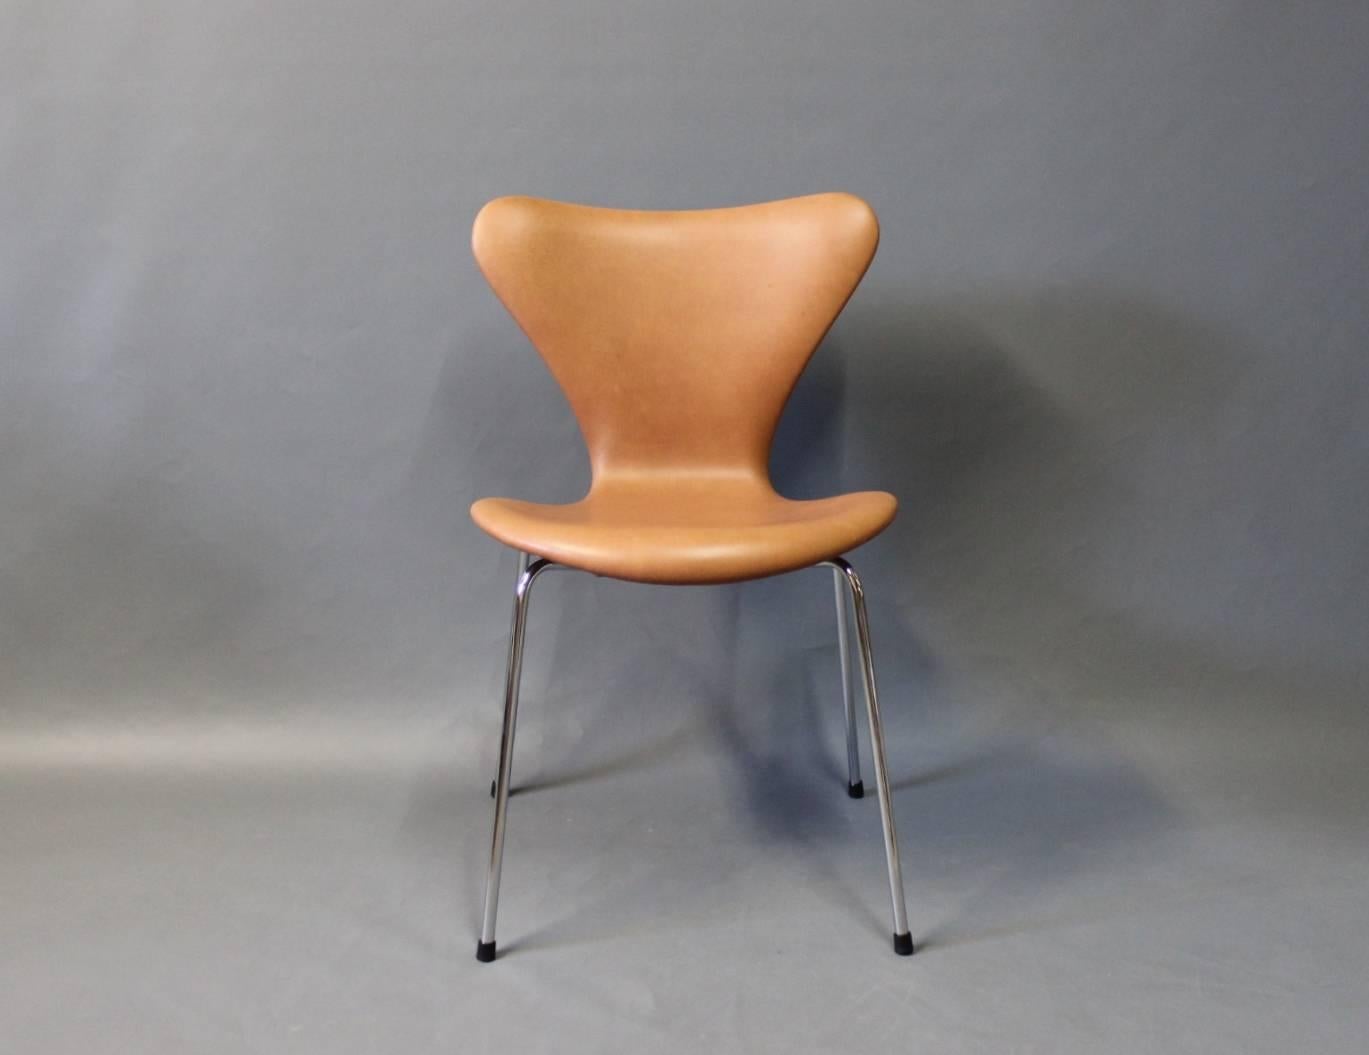 A set of four seven chairs designed by Arne Jacobsen in 1955 and manufactured by Fritz Hansen in 1967. The chairs have recently been upholstered with cognac colored elegance leather.